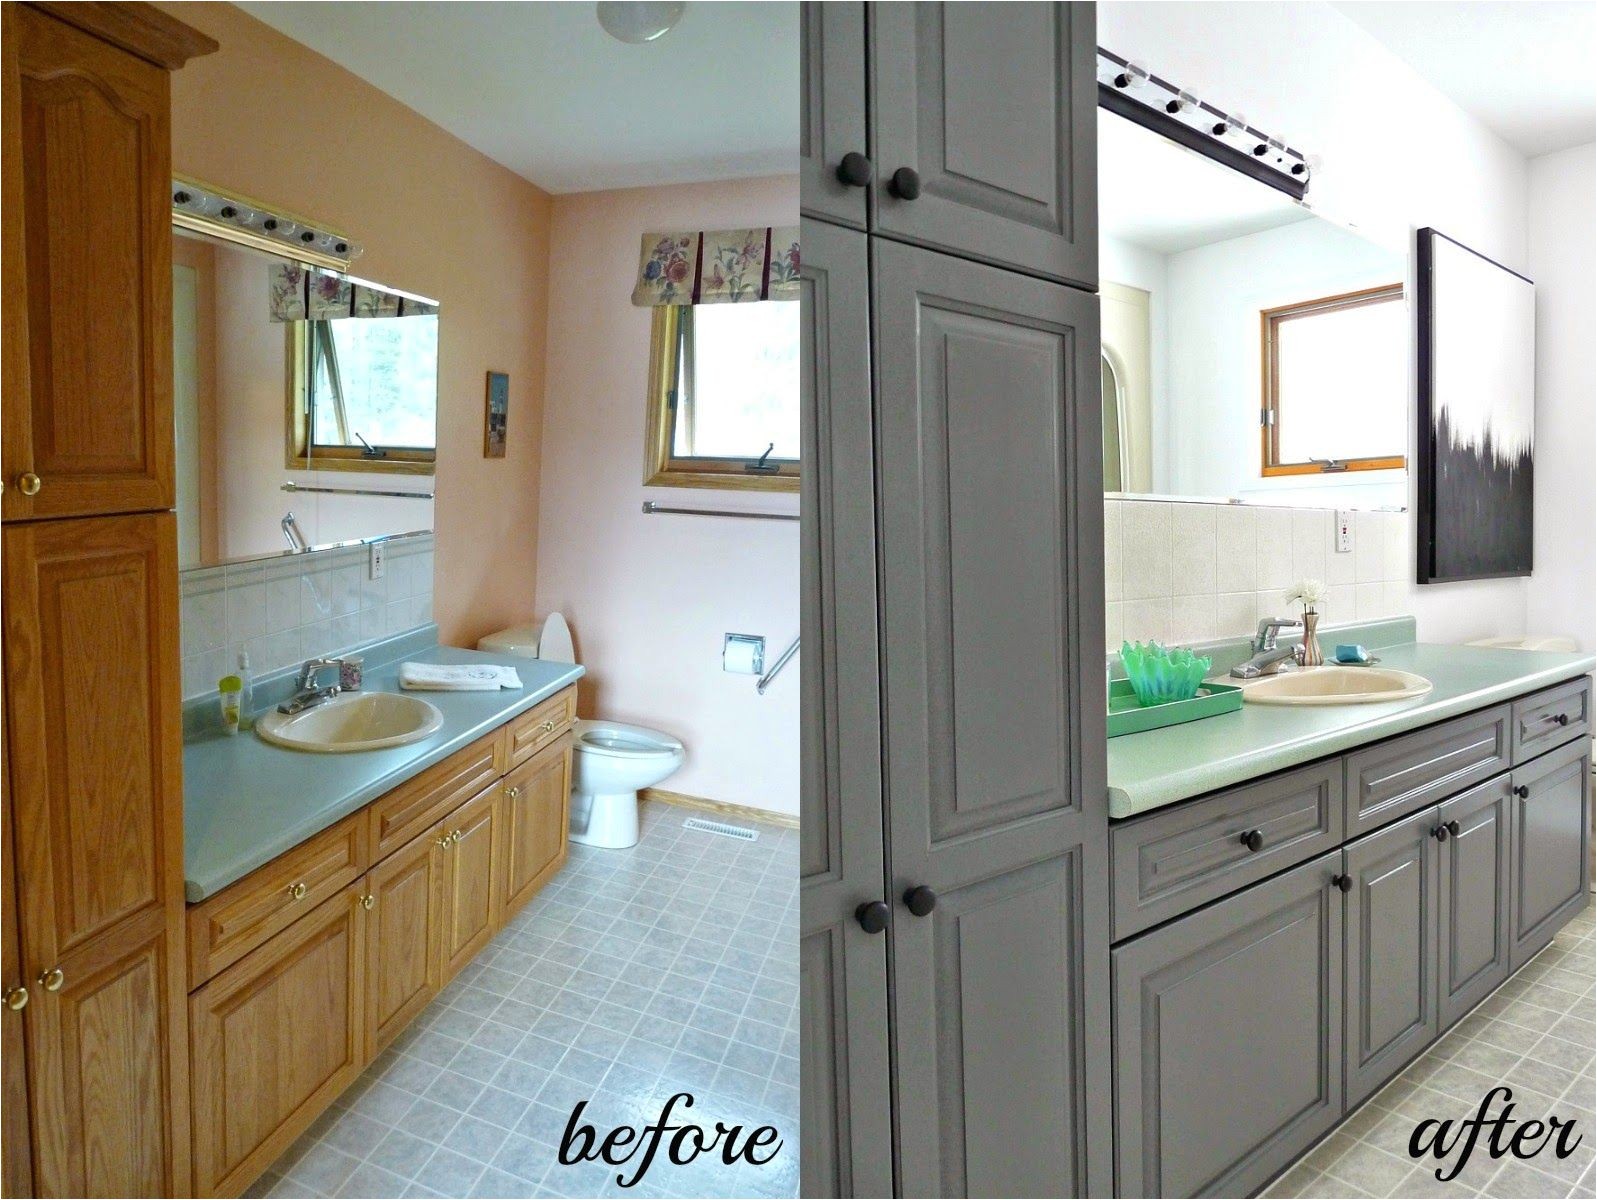 cabinet refinishing 101 latex paint vs stain vs rust oleum cabinet transformations